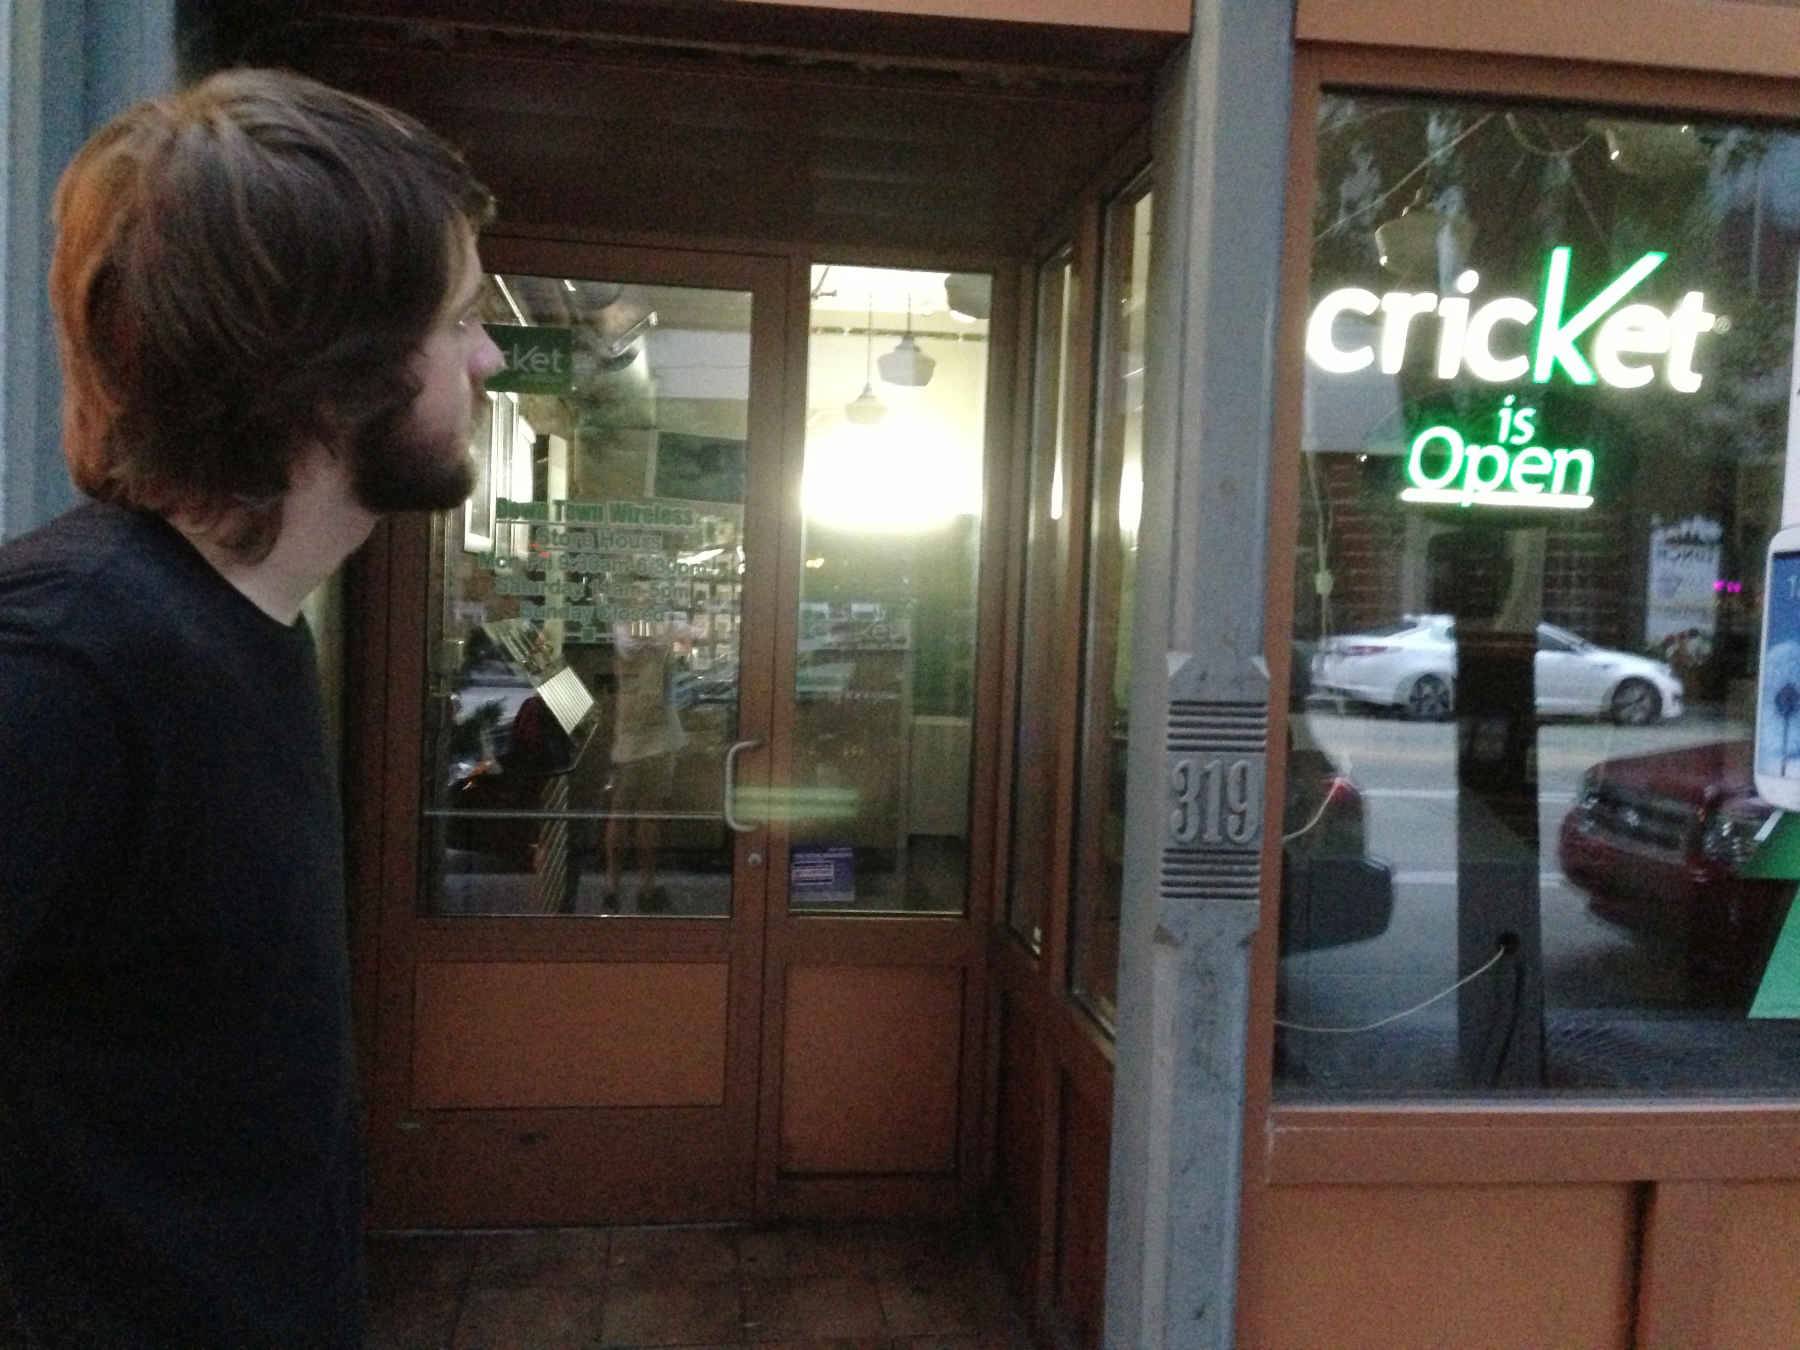 Butcher outside a store saying “Cricket is open”